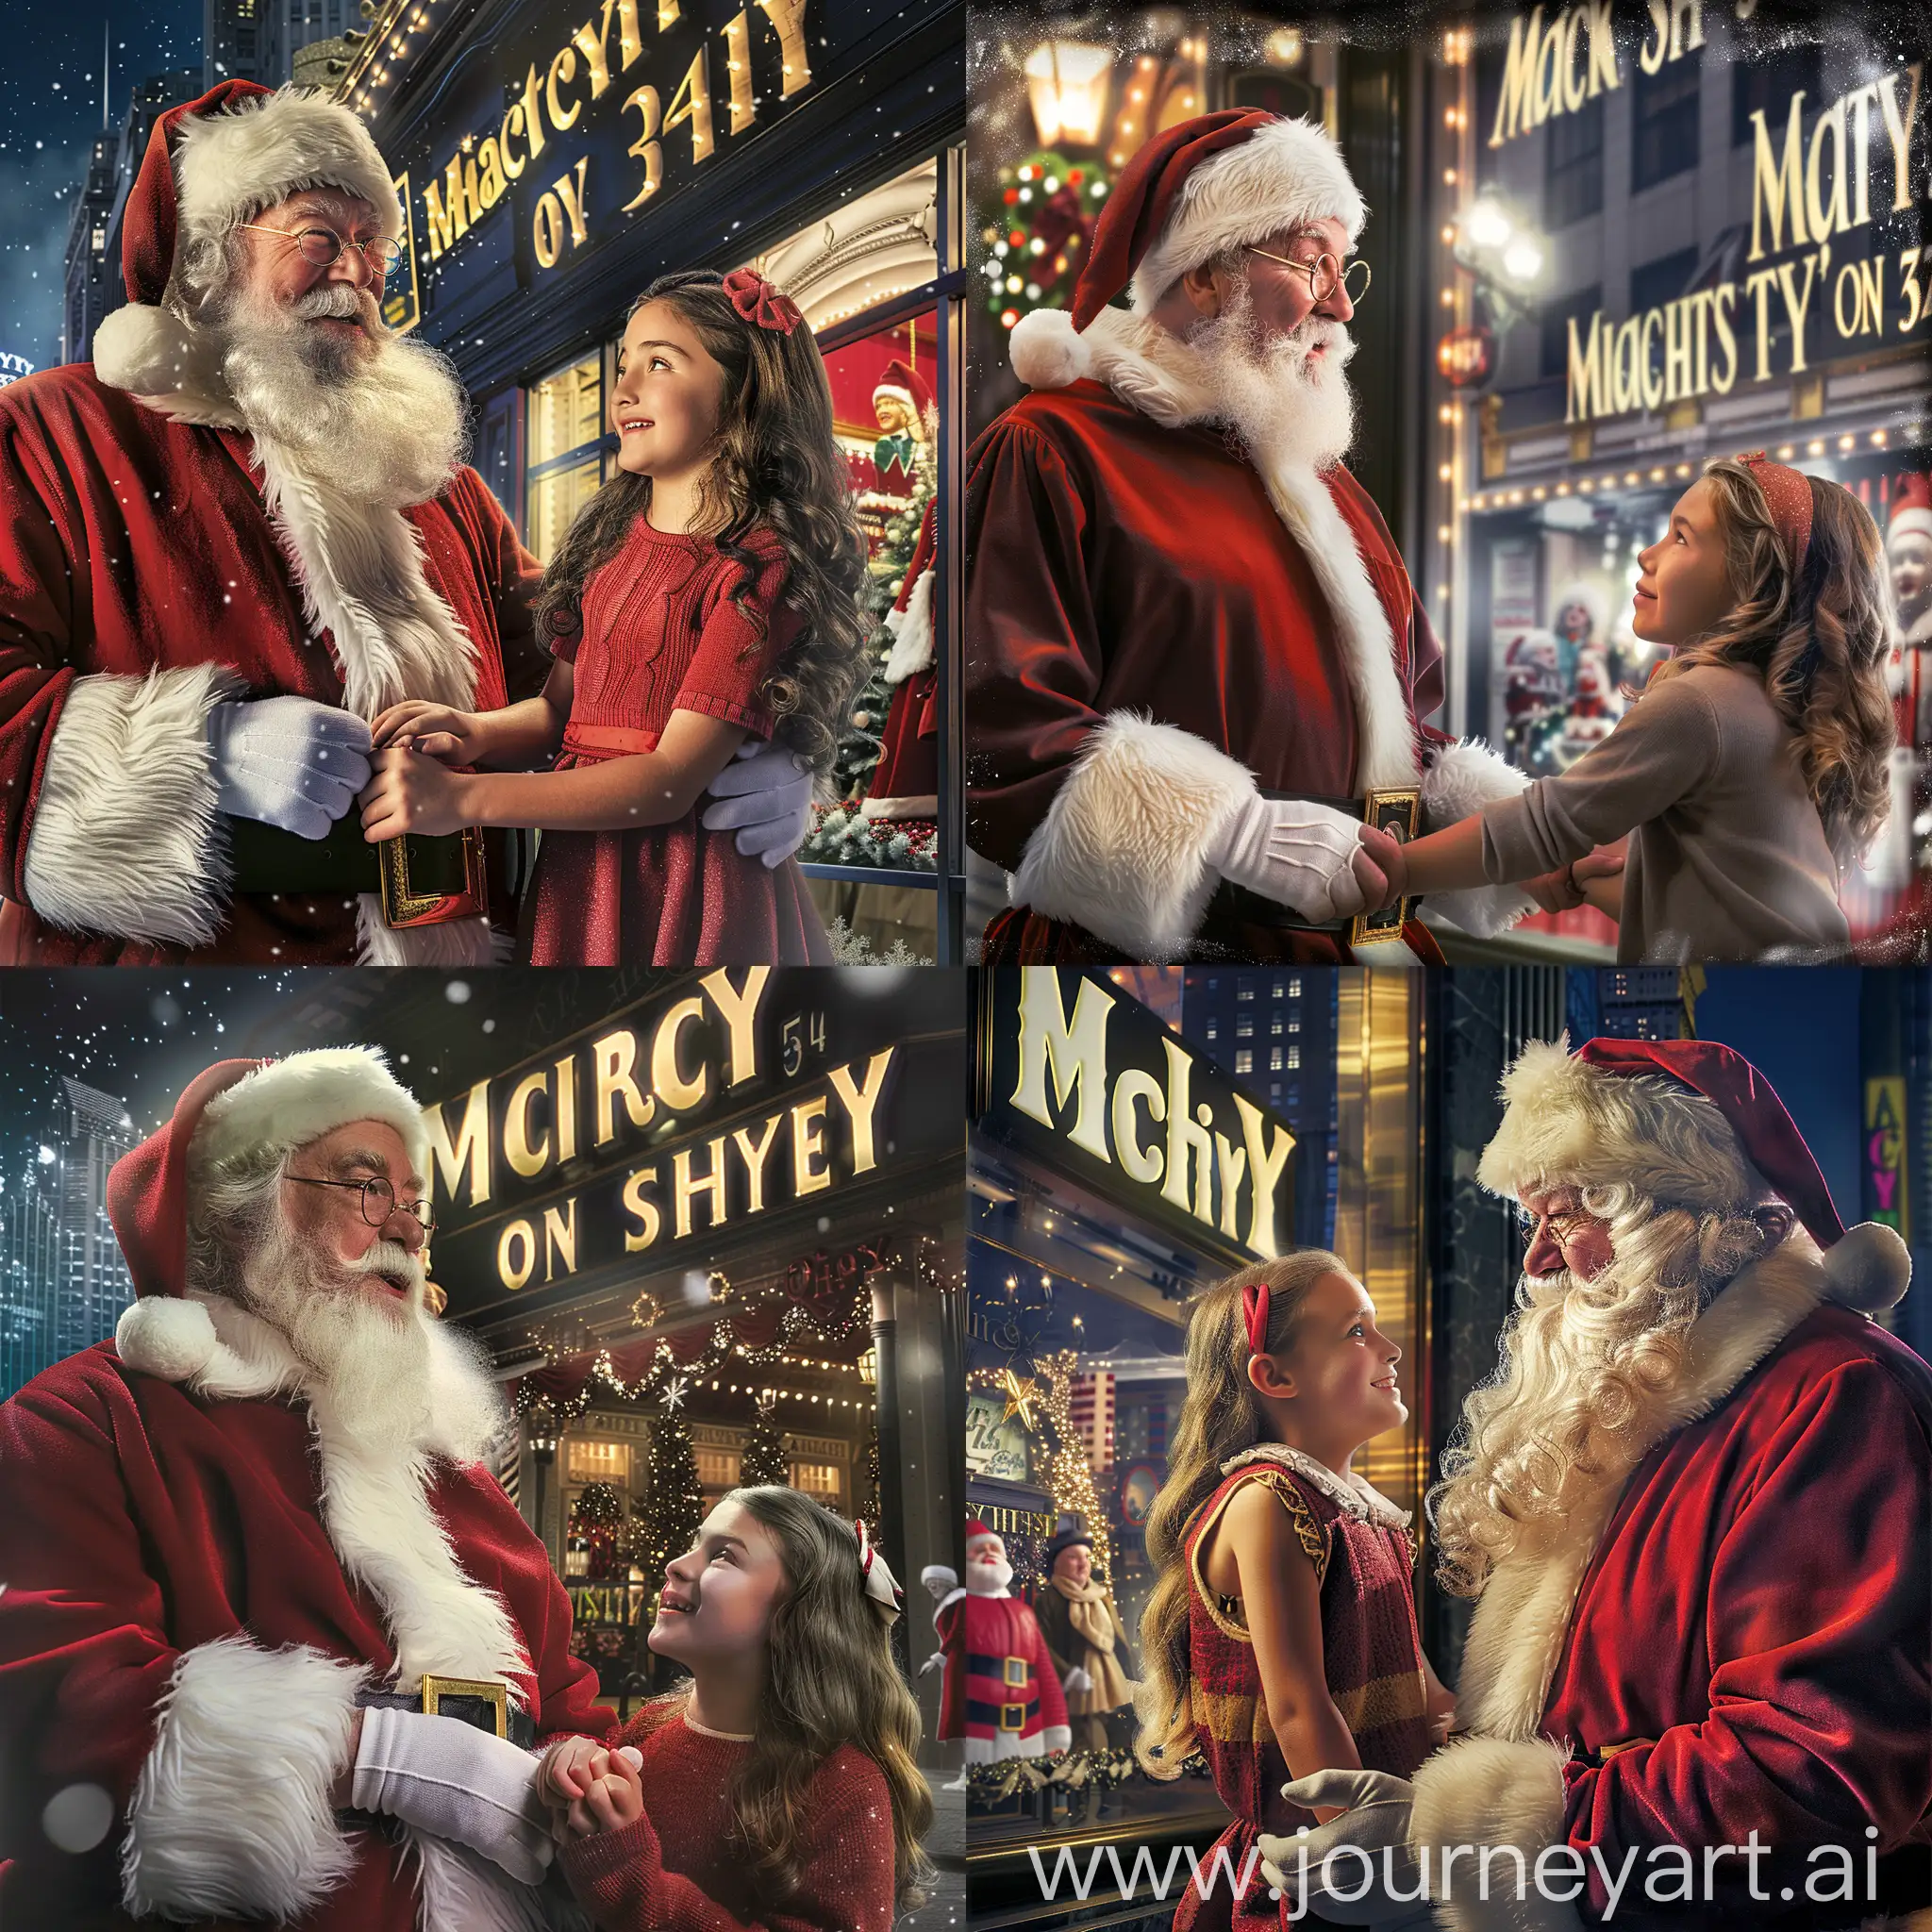 Make a Poster for the Broadway show miracle on 34th street. Feature Santa and young girl holding hands and standing by Macy's holiday store window.